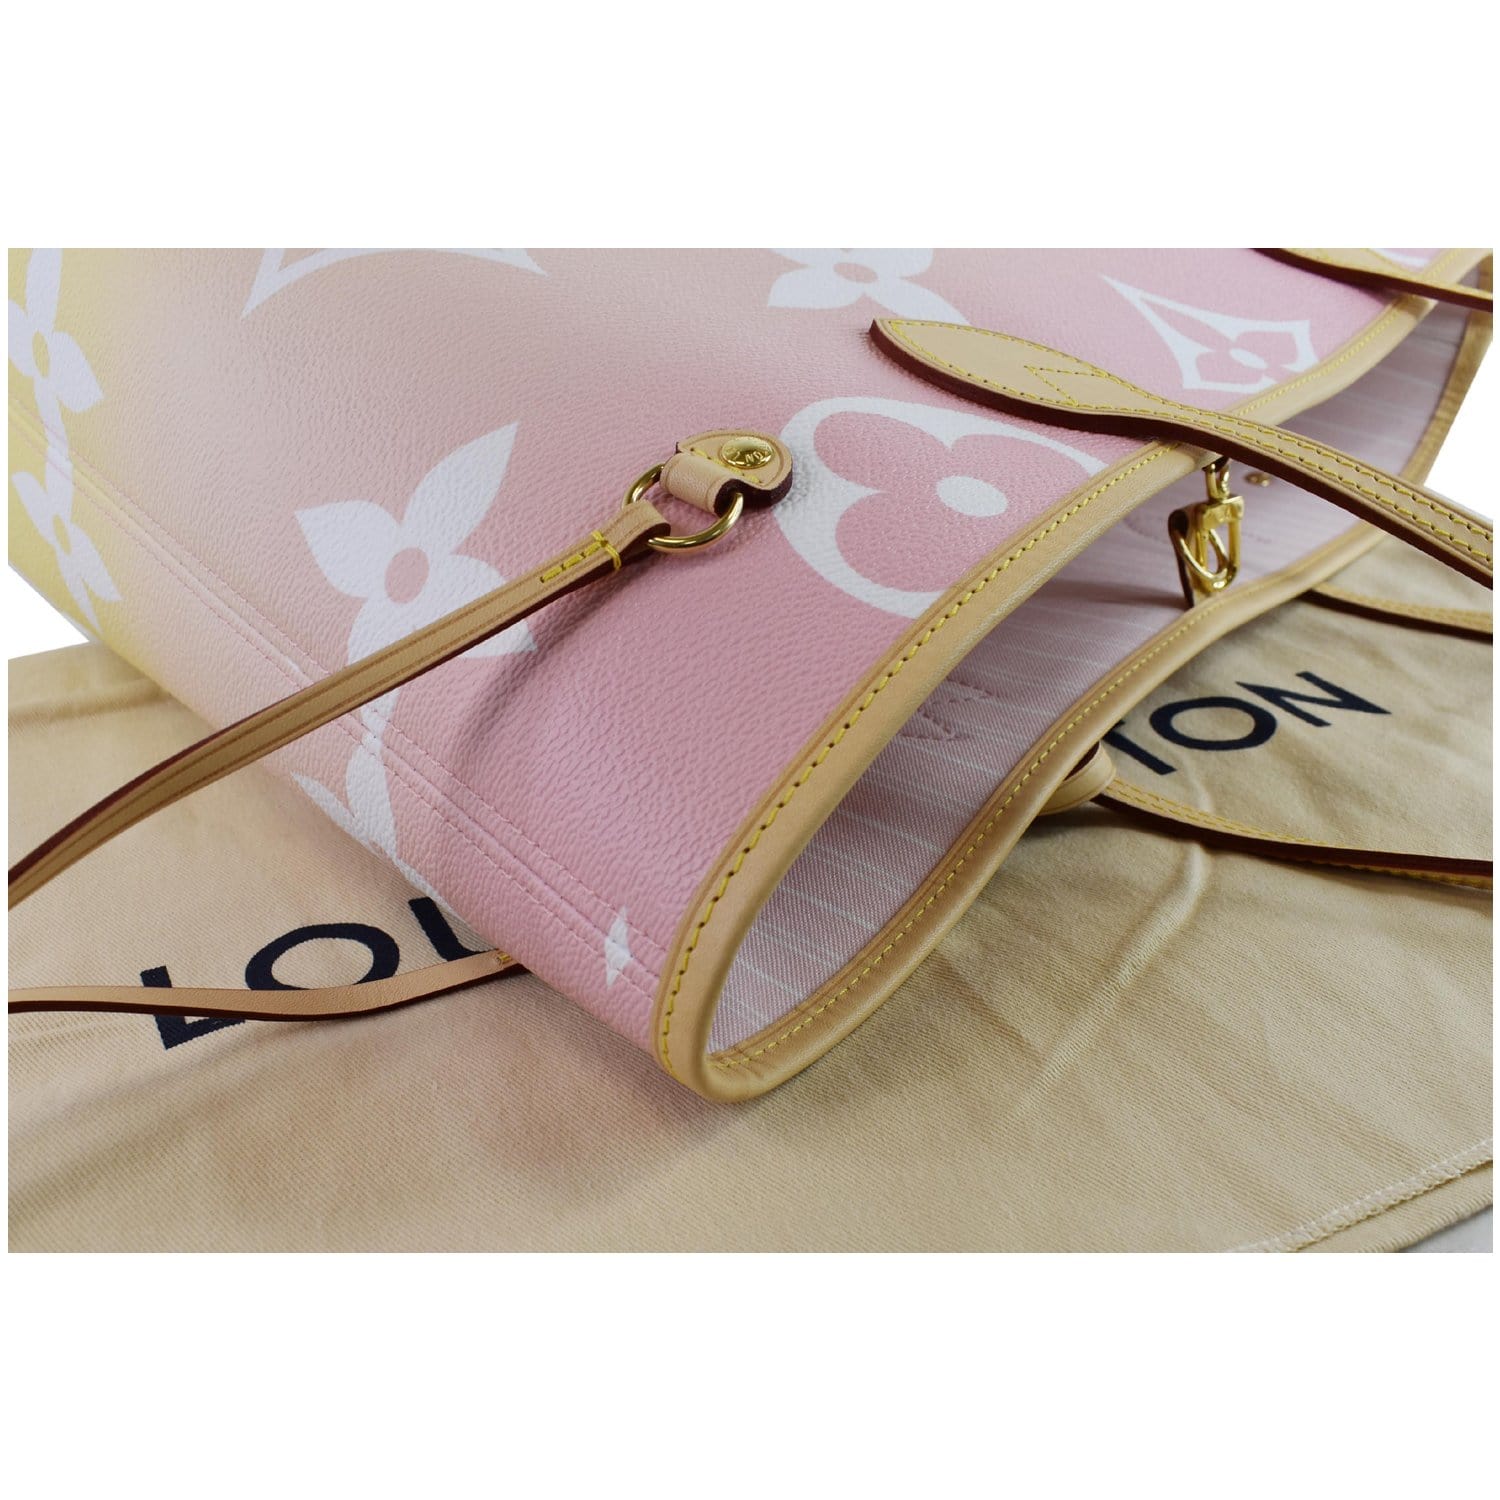 Louis Vuitton Pink Bags & Handbags for Women, Authenticity Guaranteed